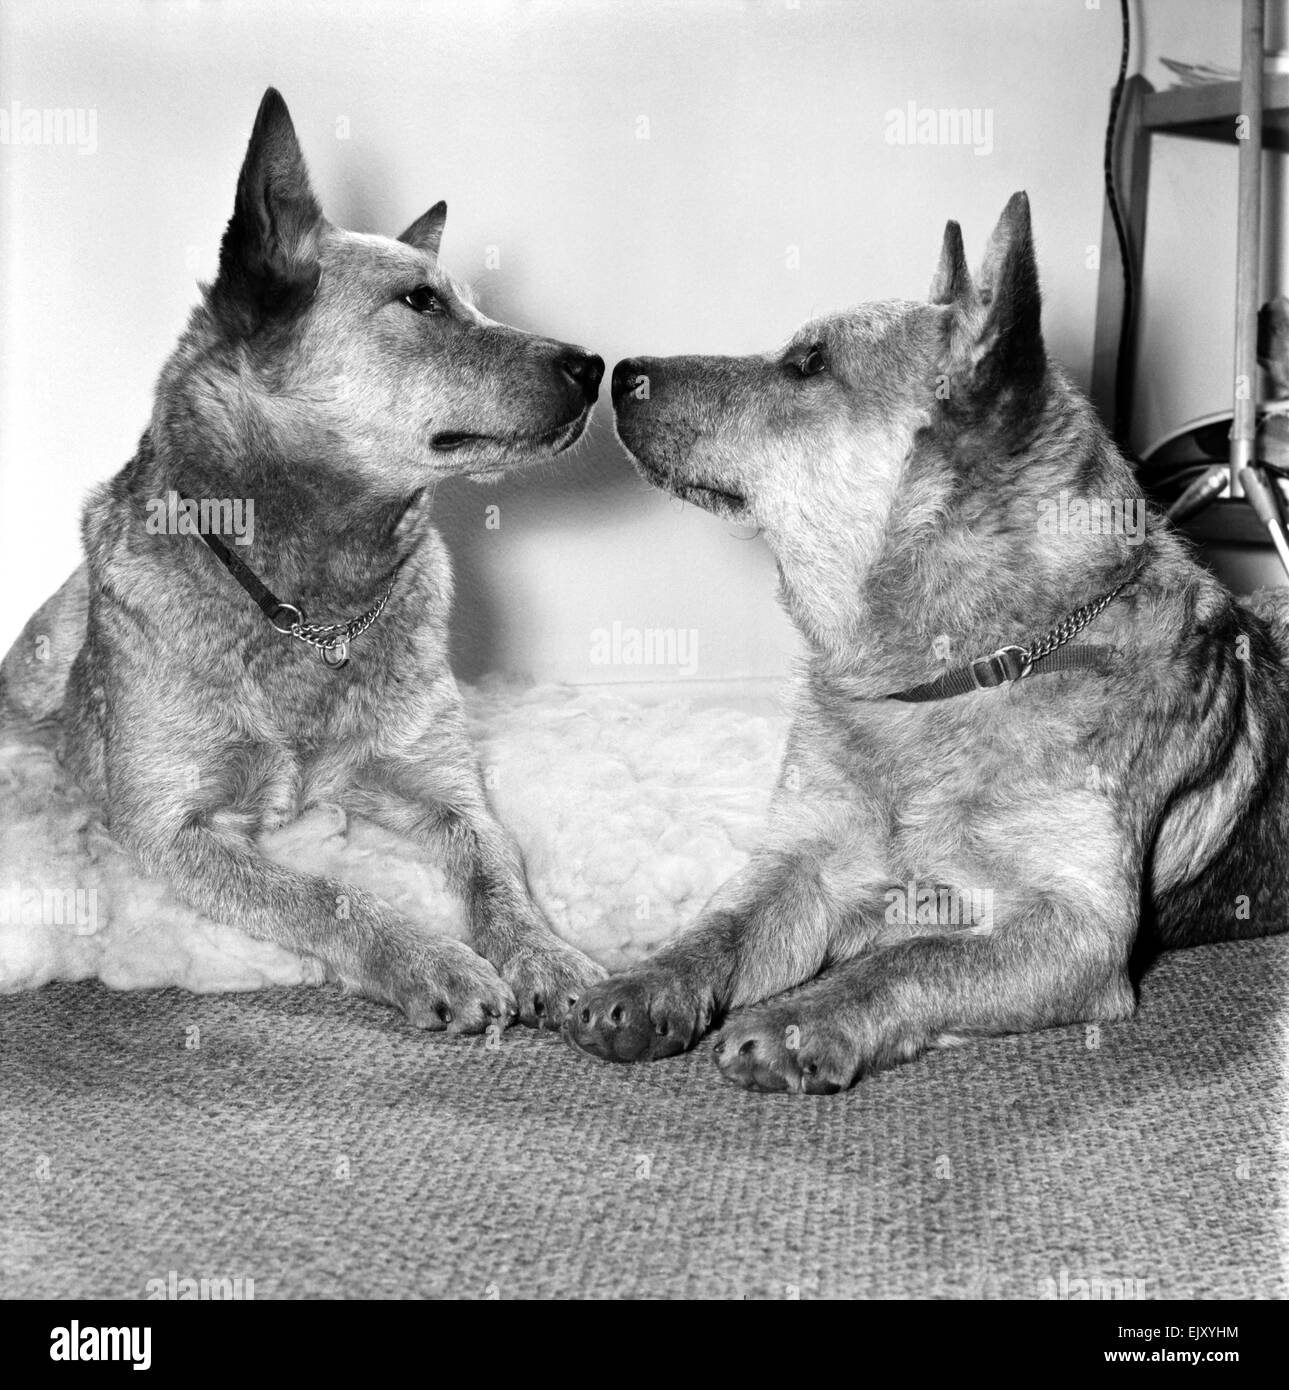 Animals: Dogs: History will be made at the Cruft's dog show this year when 'Honey' the 3 year old Australian Cattle dog makes the first ever appearance of her breed at the show on February, 14th St. Valentines day. February 1981 81-0571-008 Stock Photo